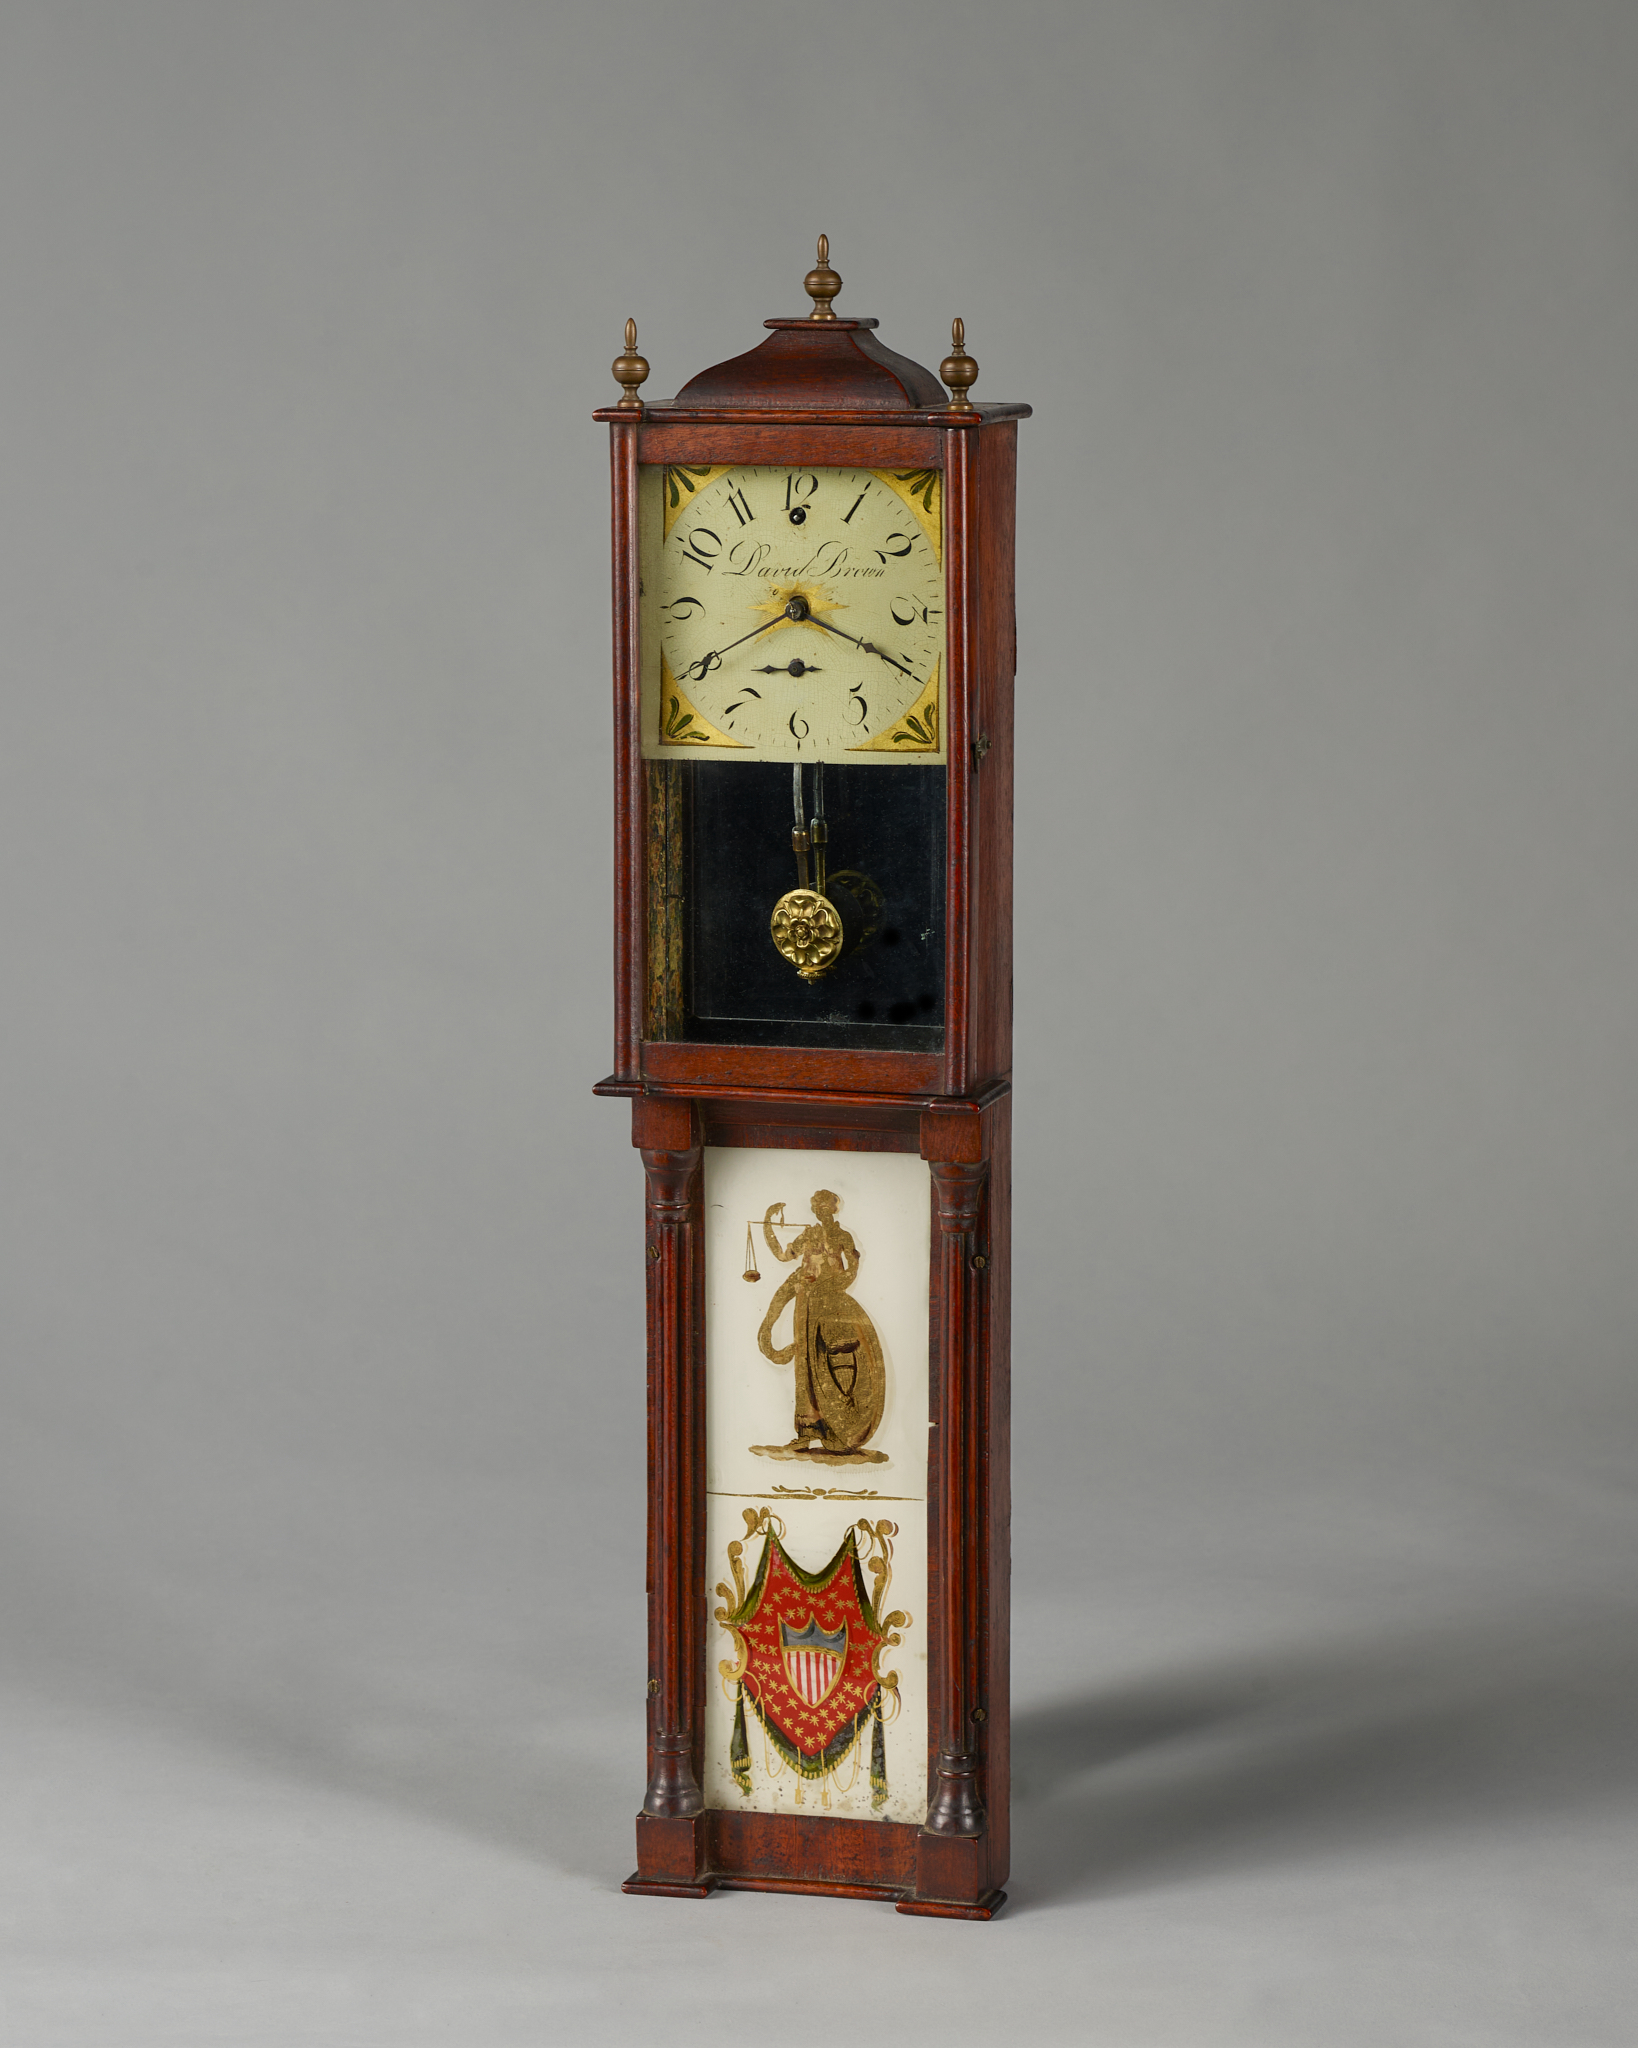 Miniature Wall Clock with an Églomisé Panel Signed on the Dial, “David Brown/Providence”